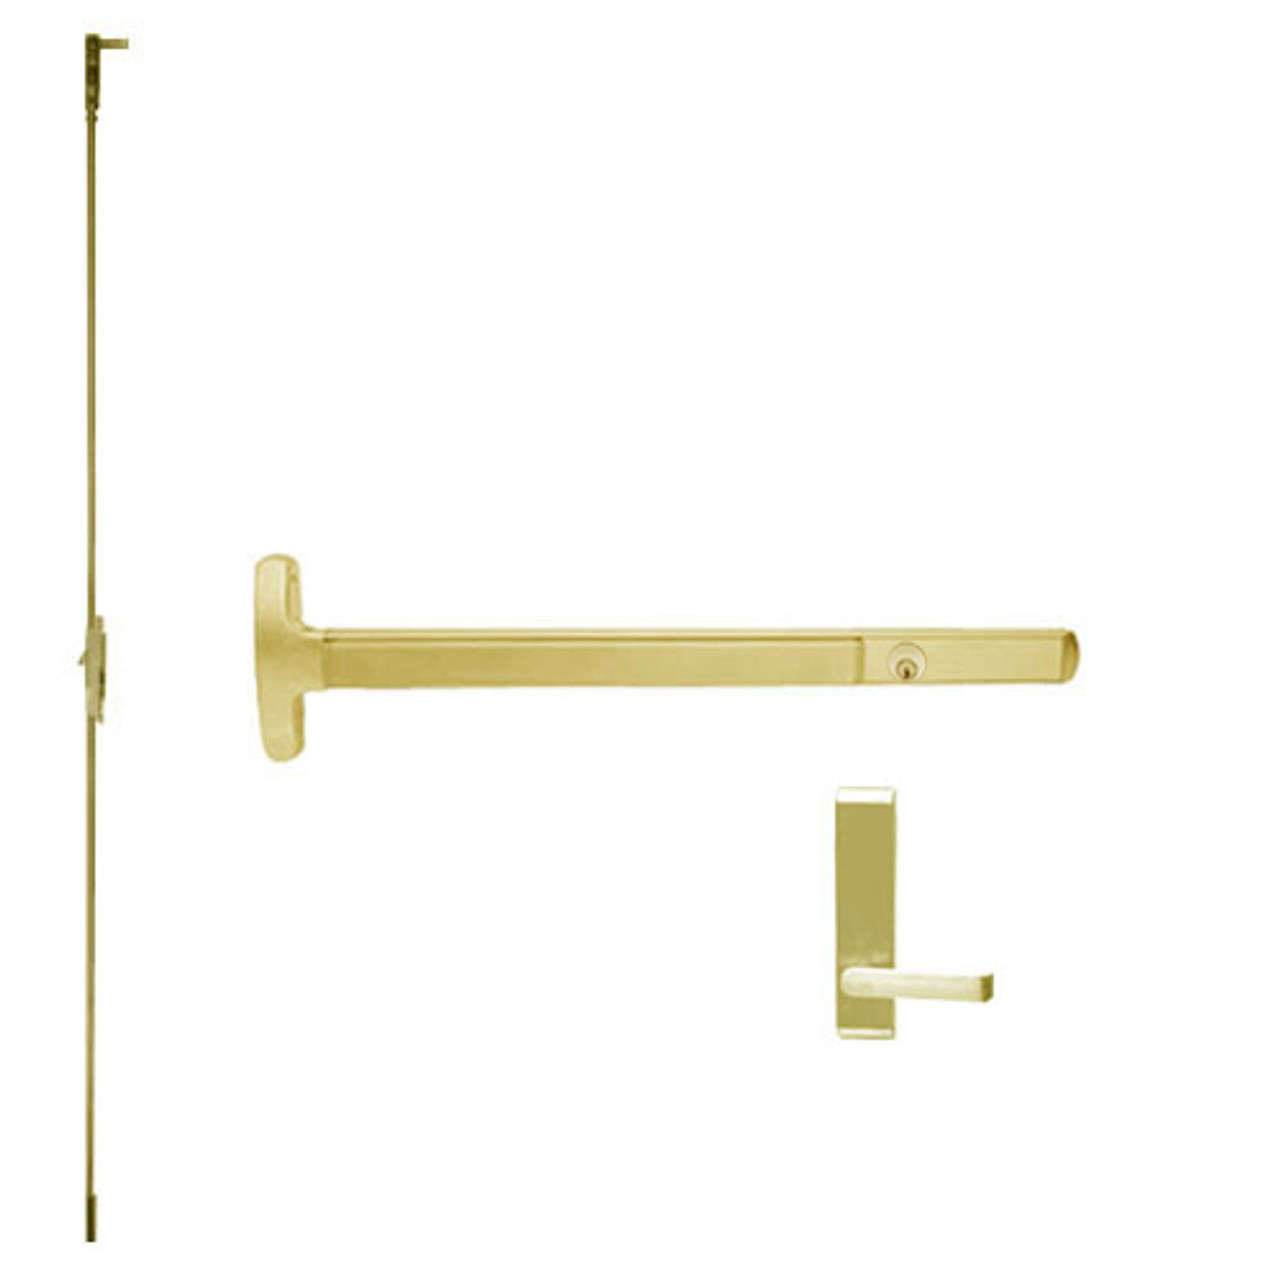 CD24-C-L-BE-DANE-US3-2-LHR Falcon Exit Device in Polished Brass